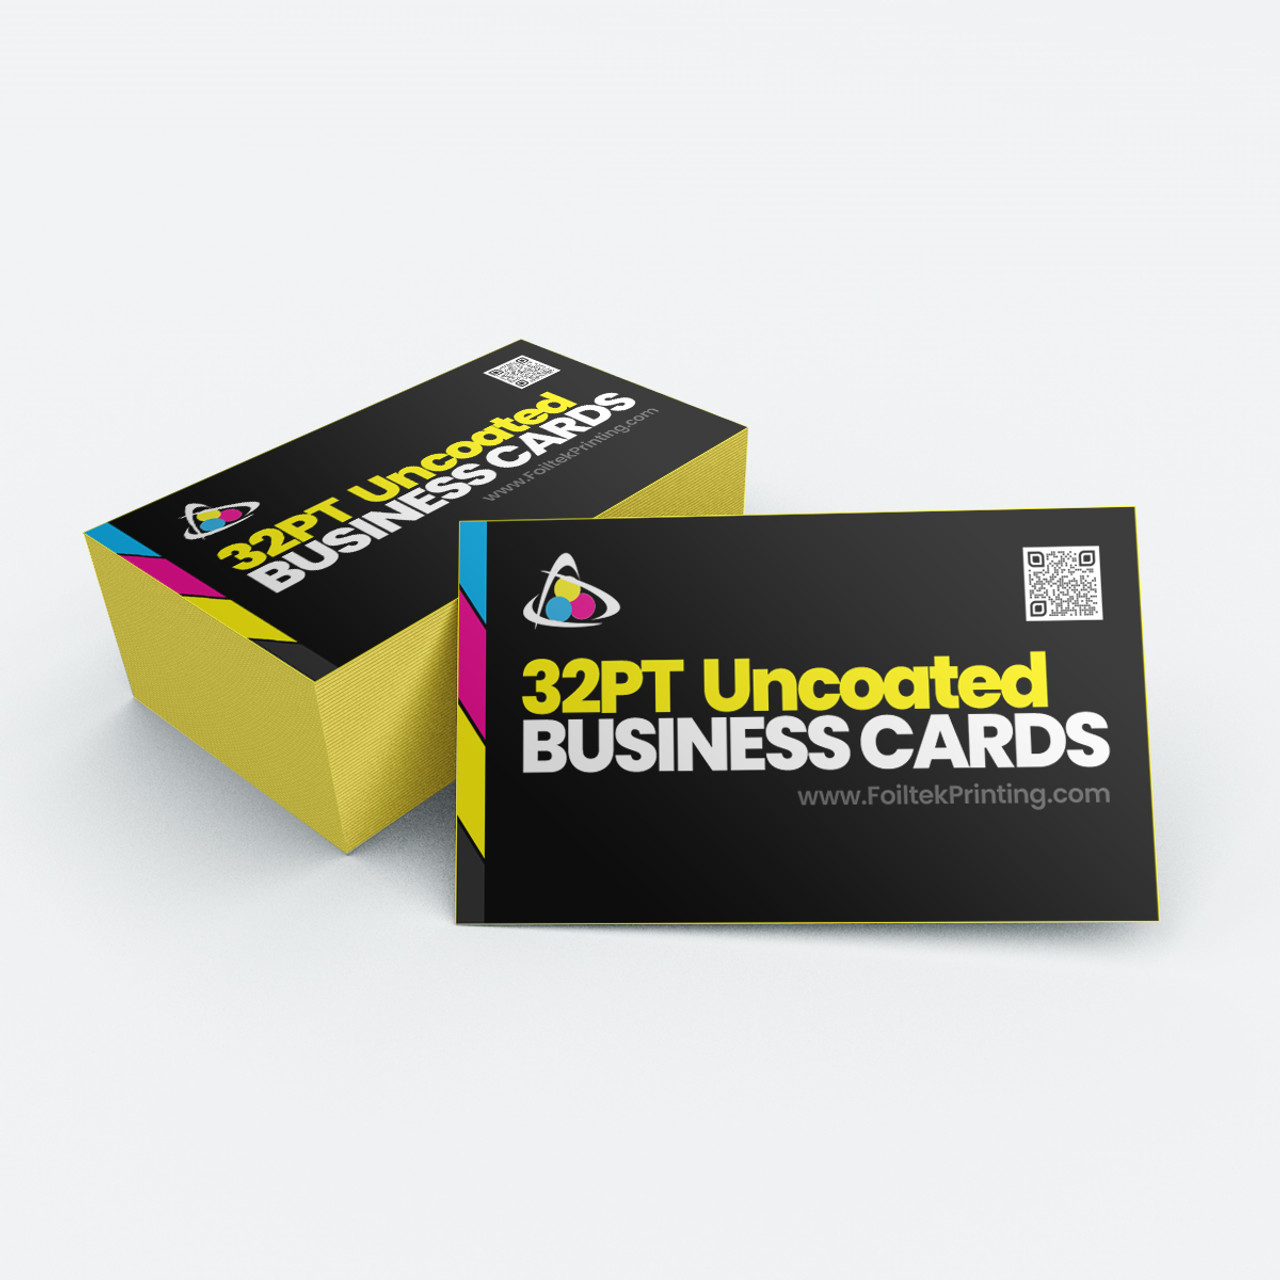 Uncoated Thick Business Cards with Painted Edges 32pt